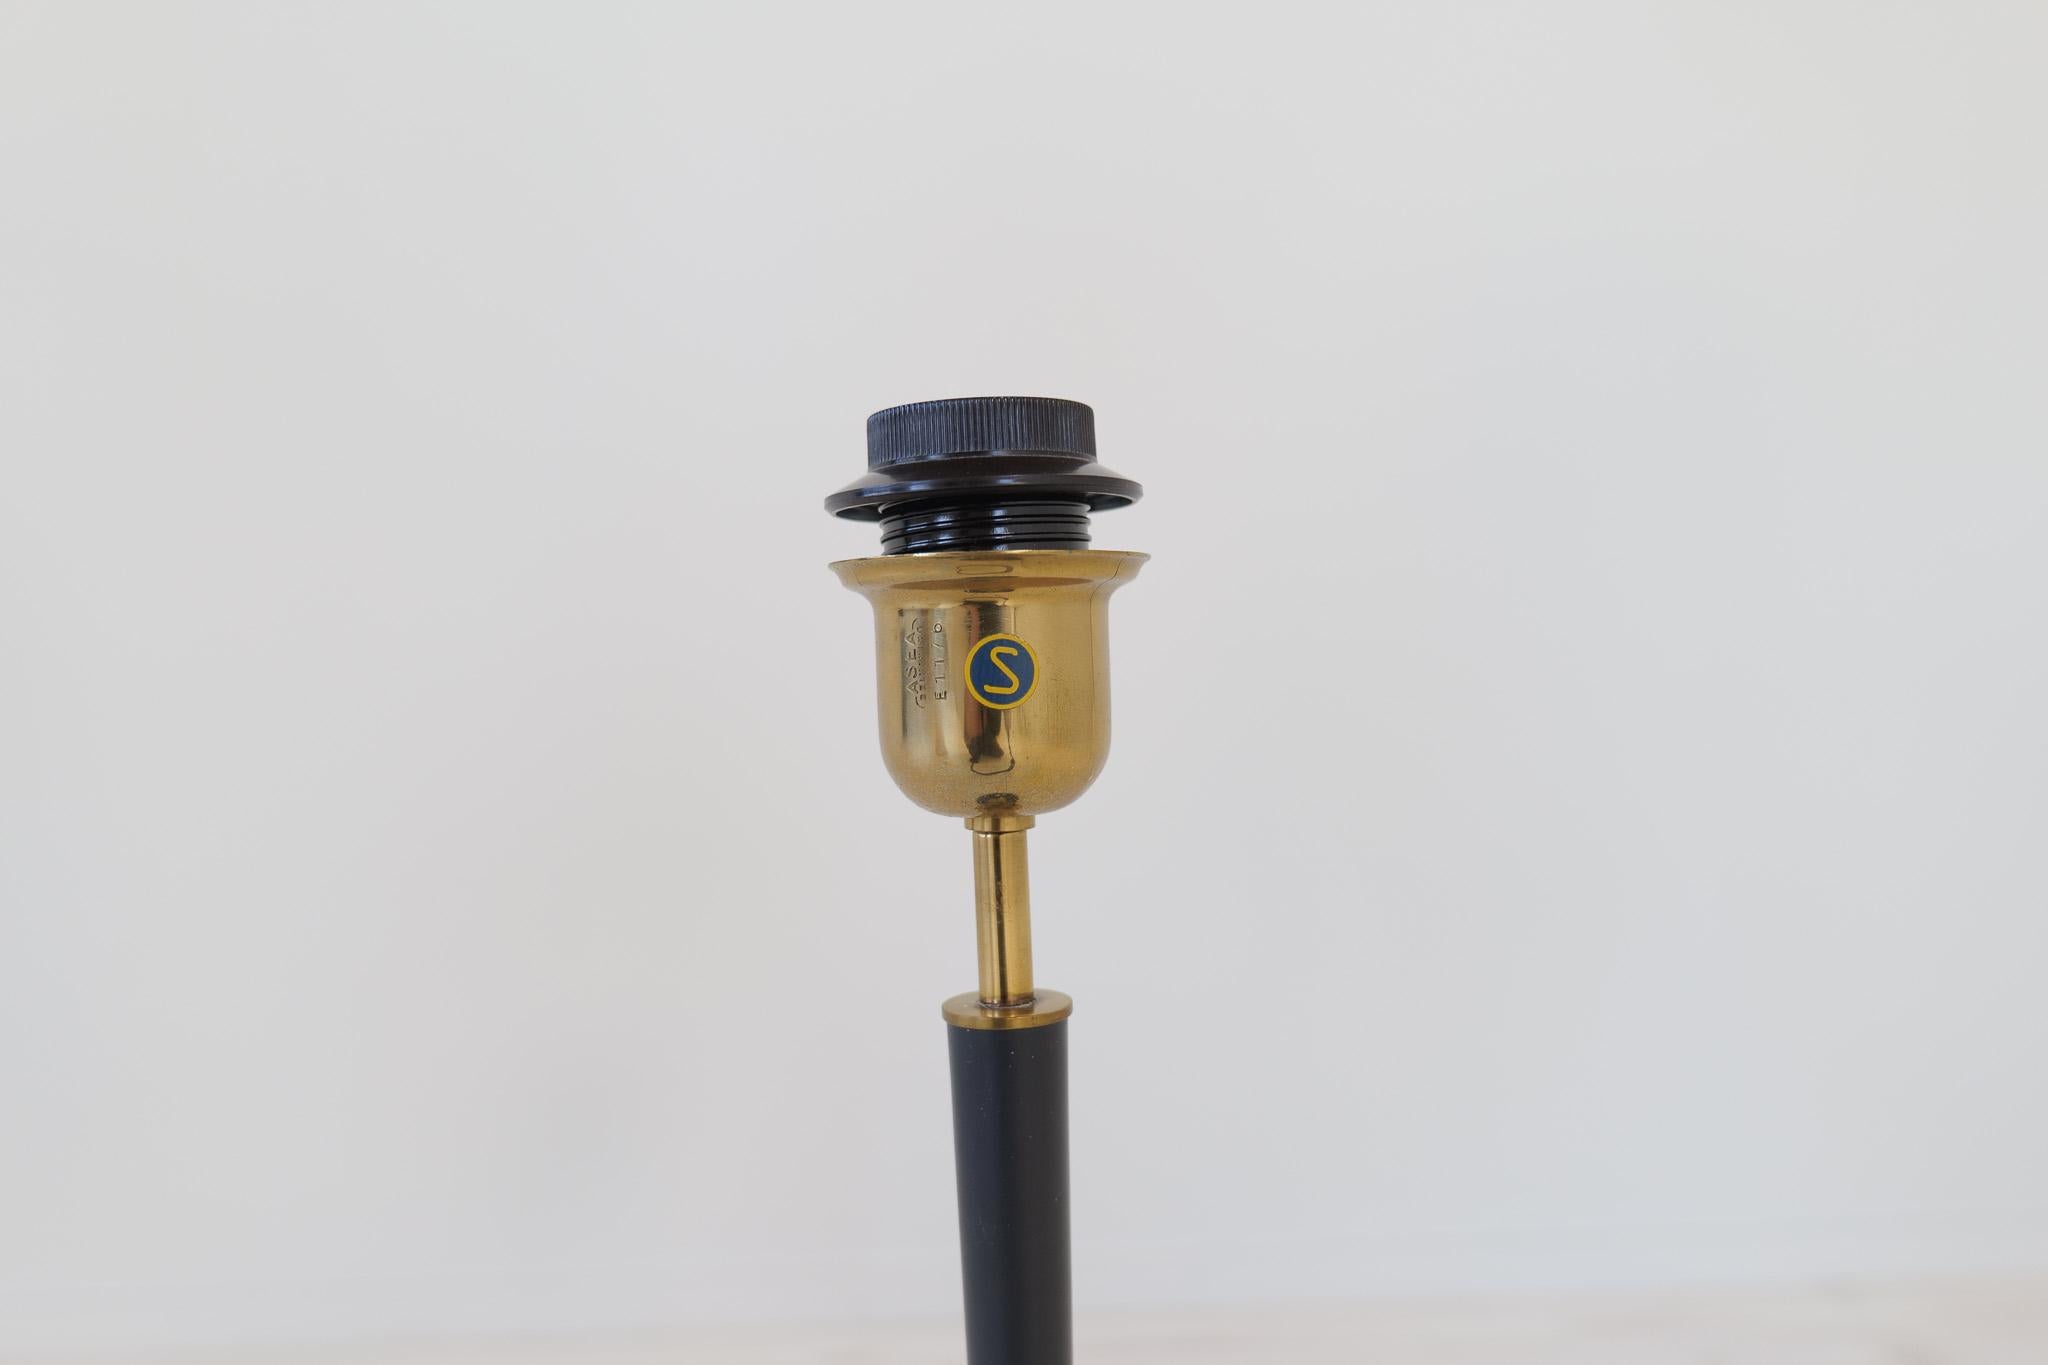 Midcentury Modern Table Lamp in Brass and Cast Iron Asea Sweden, 1950s For Sale 8